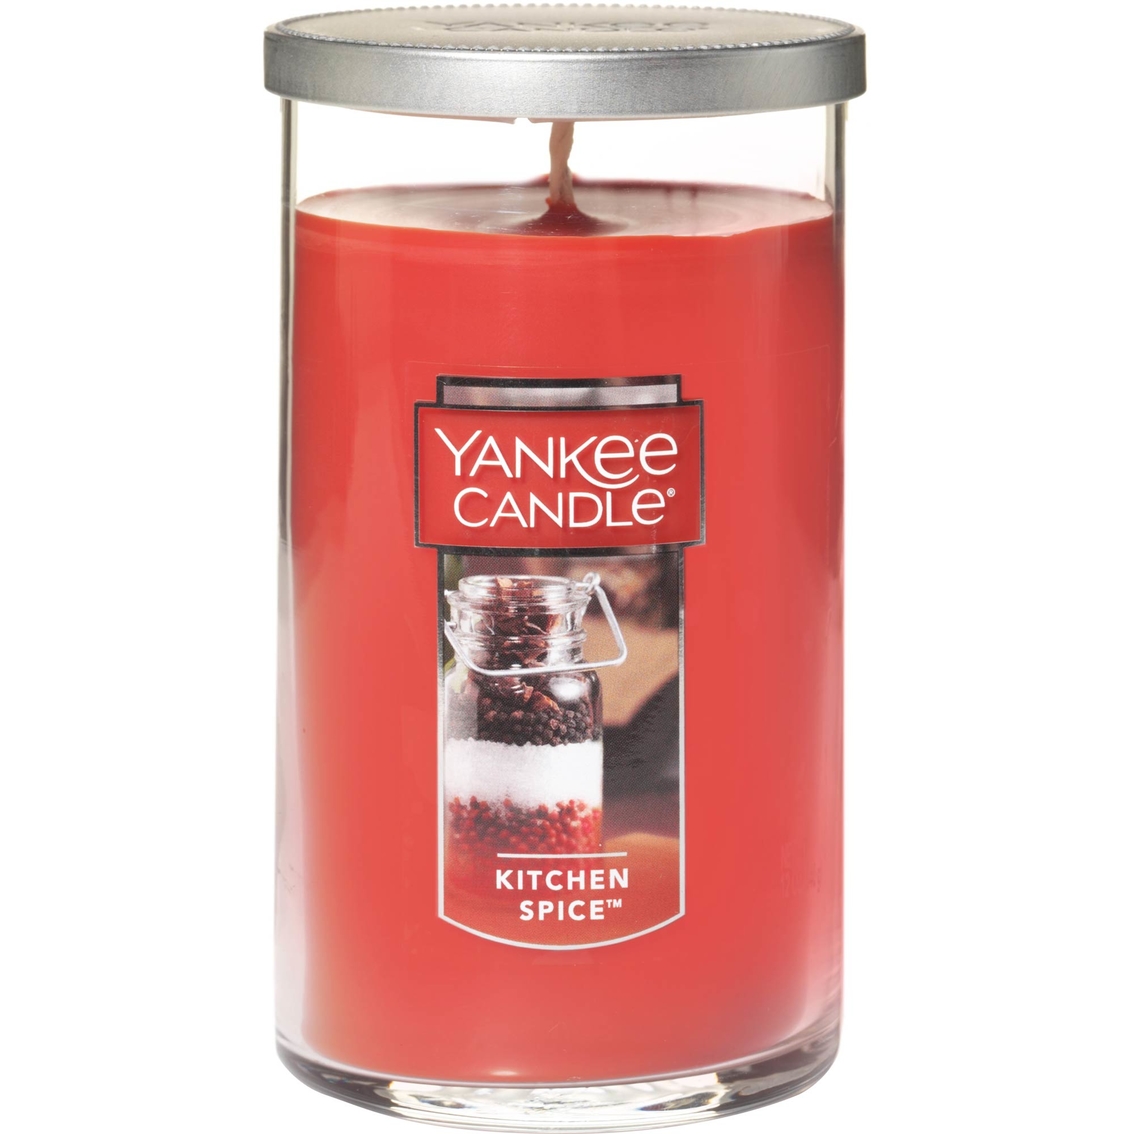 Yankee Candle Kitchen Spice Medium Perfect Pillar Candle Candles